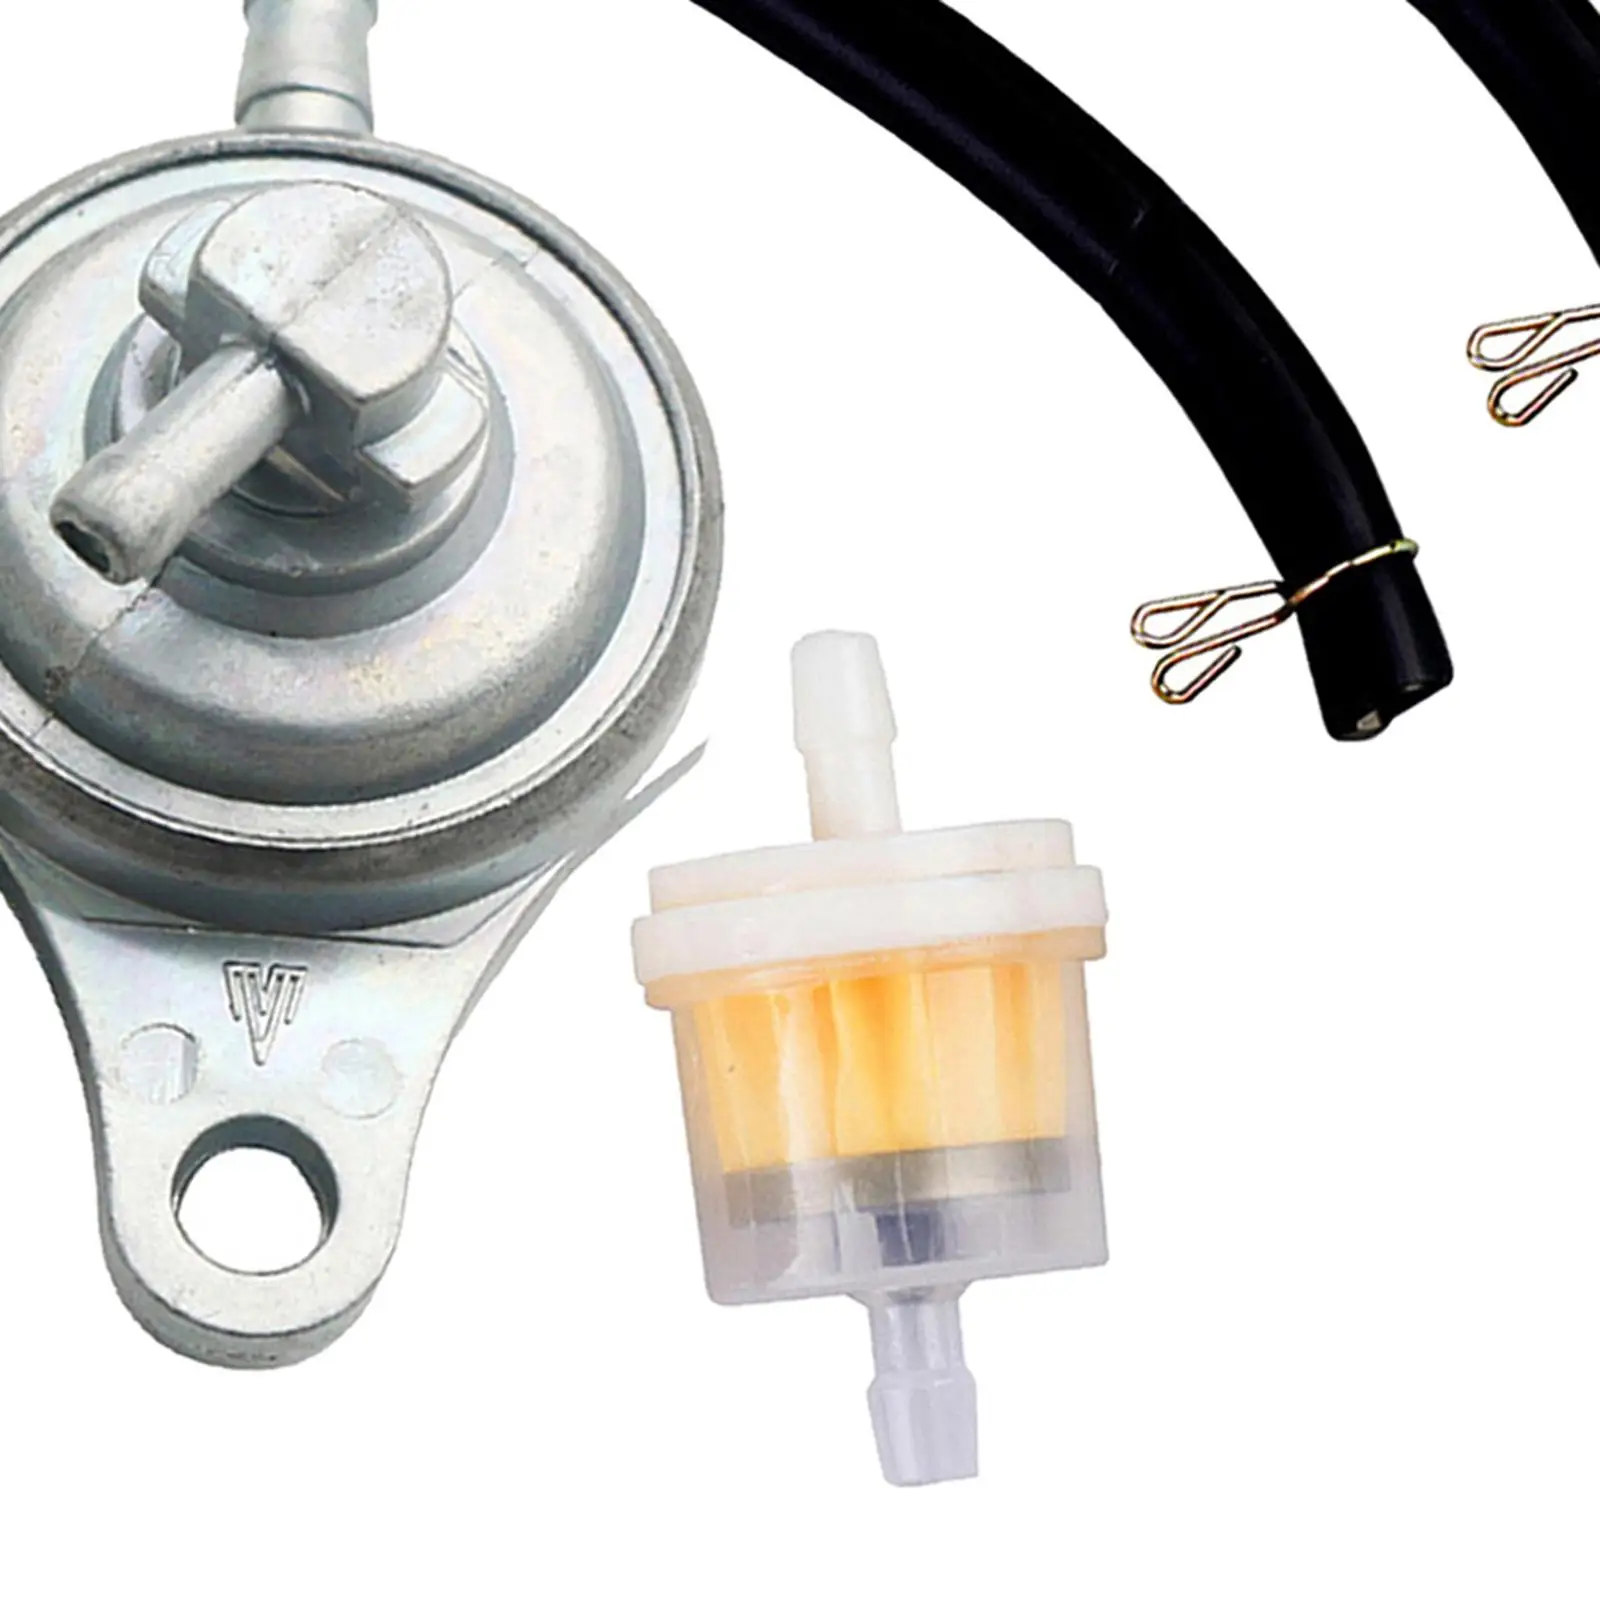 Lohobby Fuel Oil Petcock Pump Switch/ Replacement/ Motorcycle Parts/